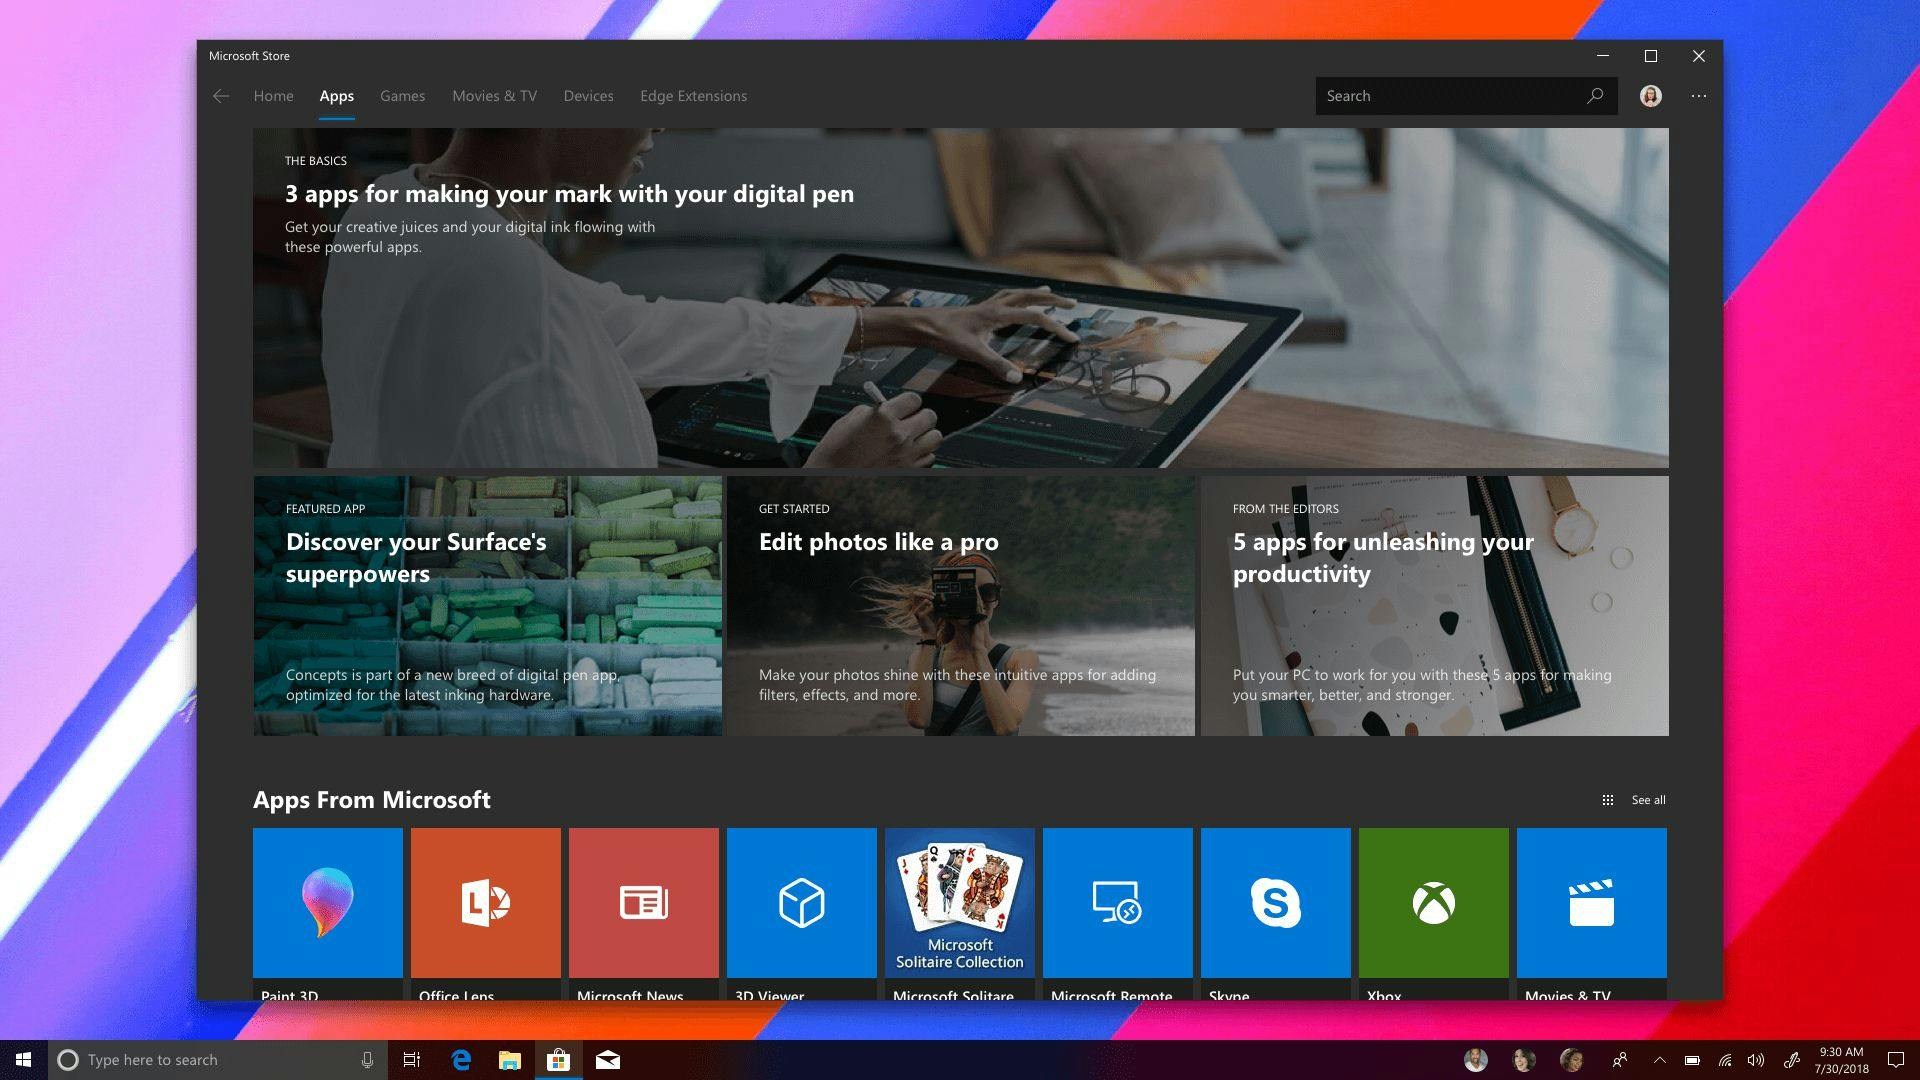 The Apps tab homepage has been repurposed as a hub to discover brand-new content from the Microsoft Store editors.